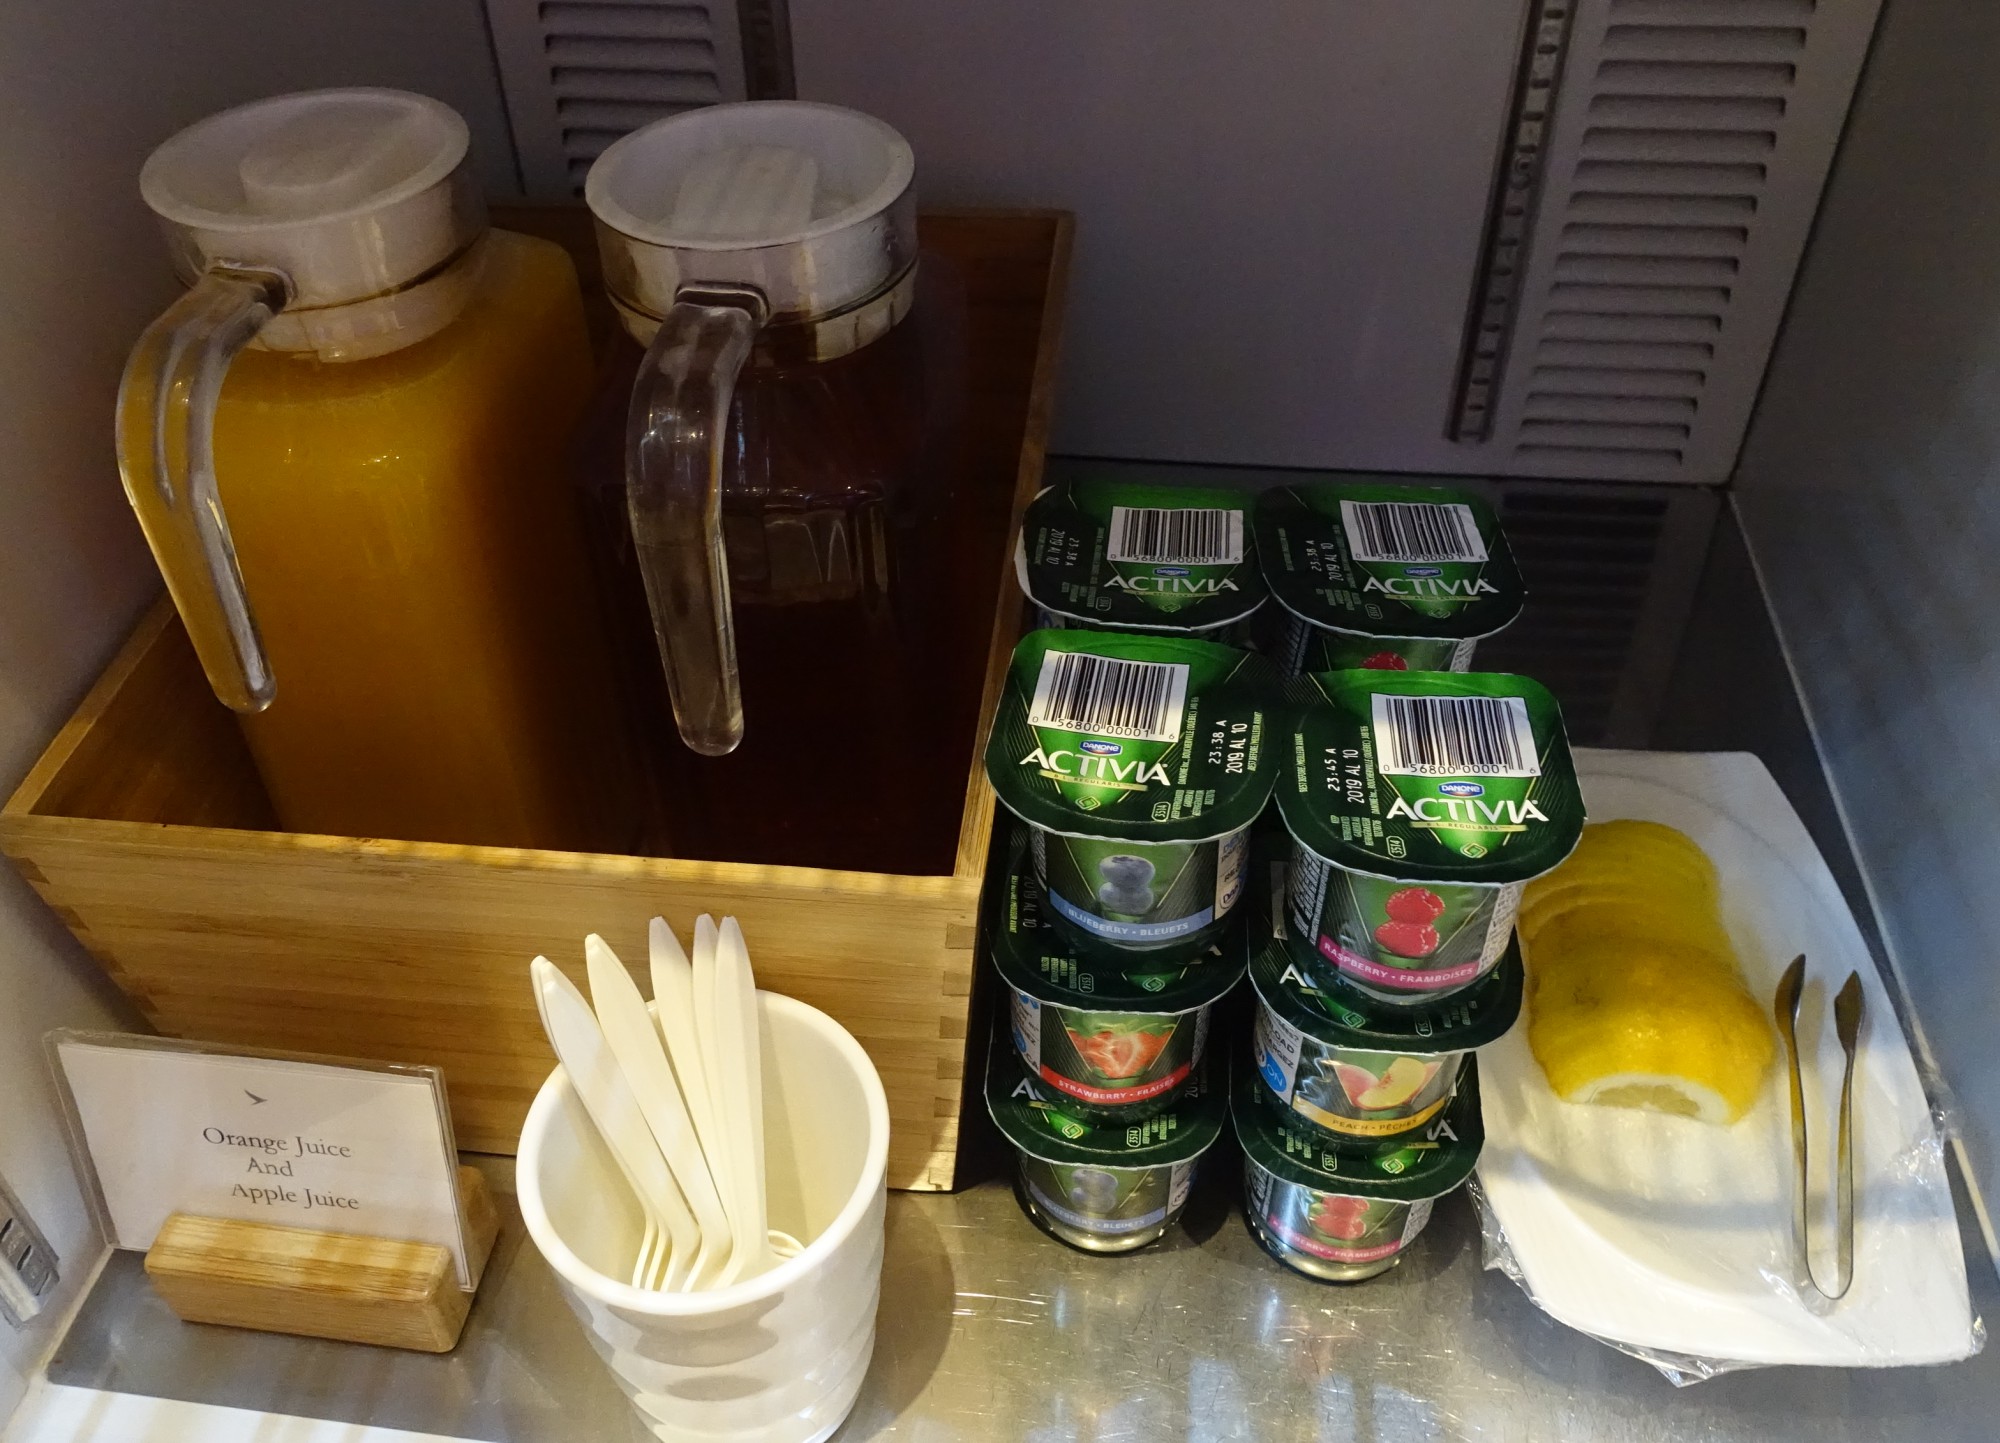 Juices and Yogurt, Cathay Pacific Vancouver Lounge Review